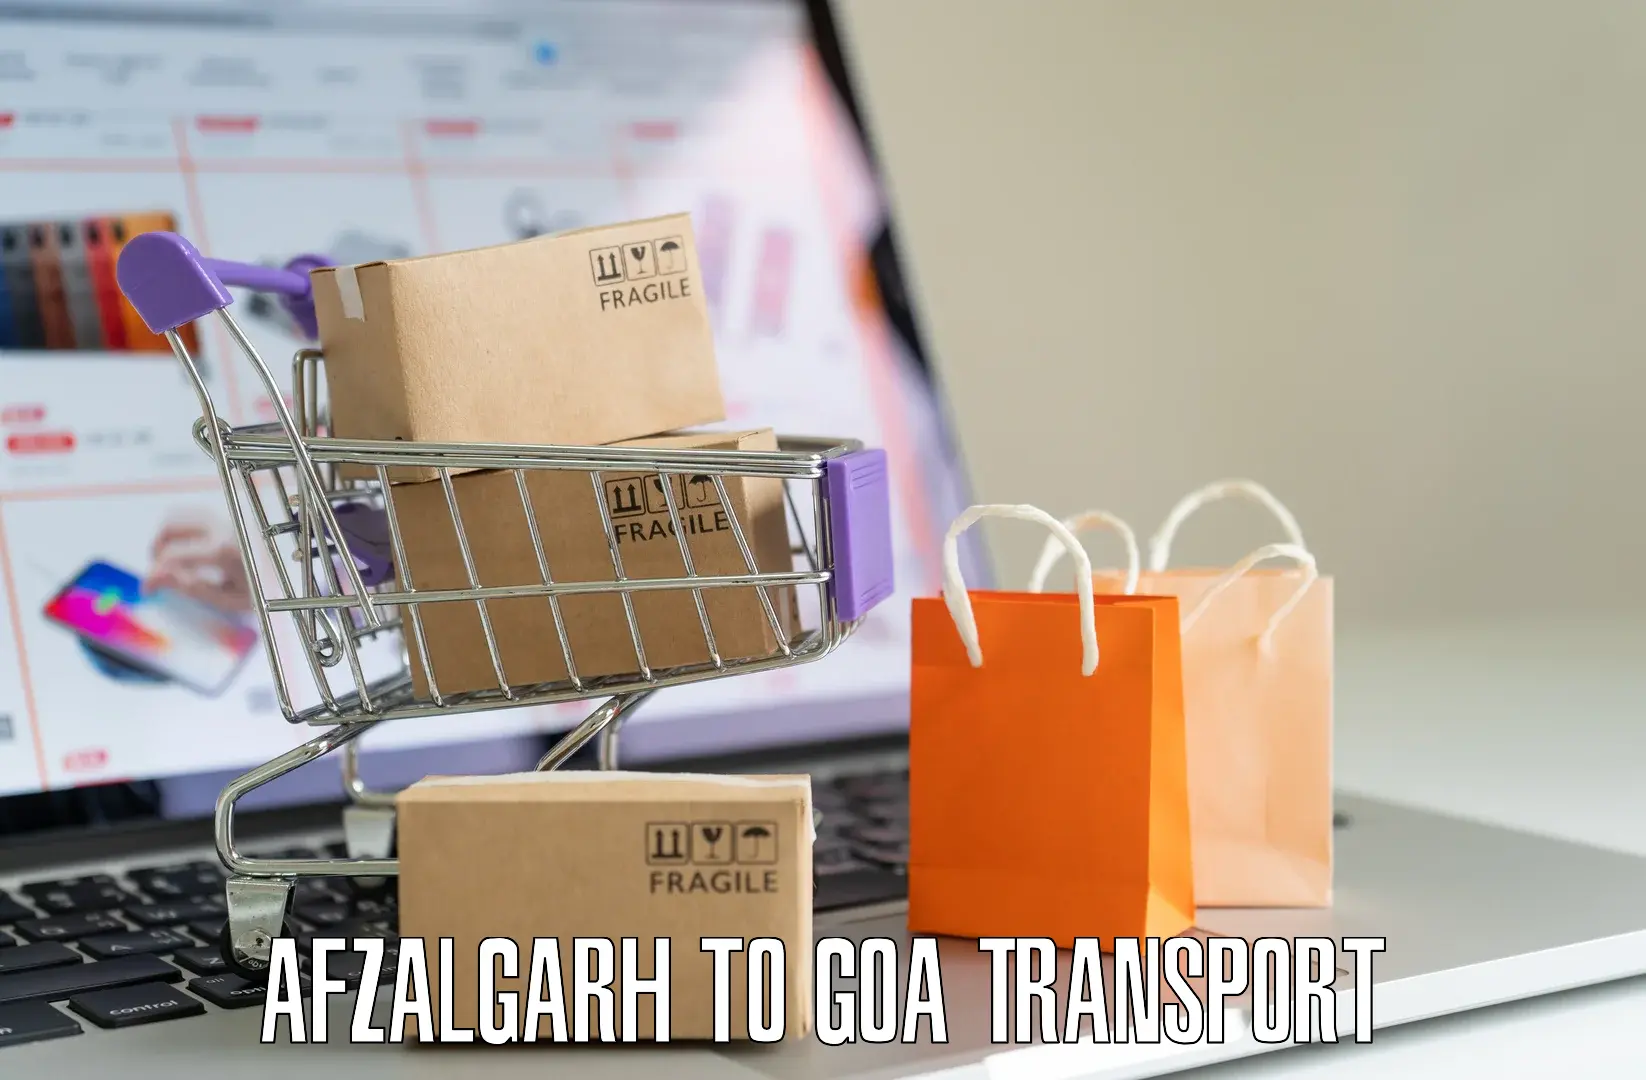 Commercial transport service Afzalgarh to South Goa